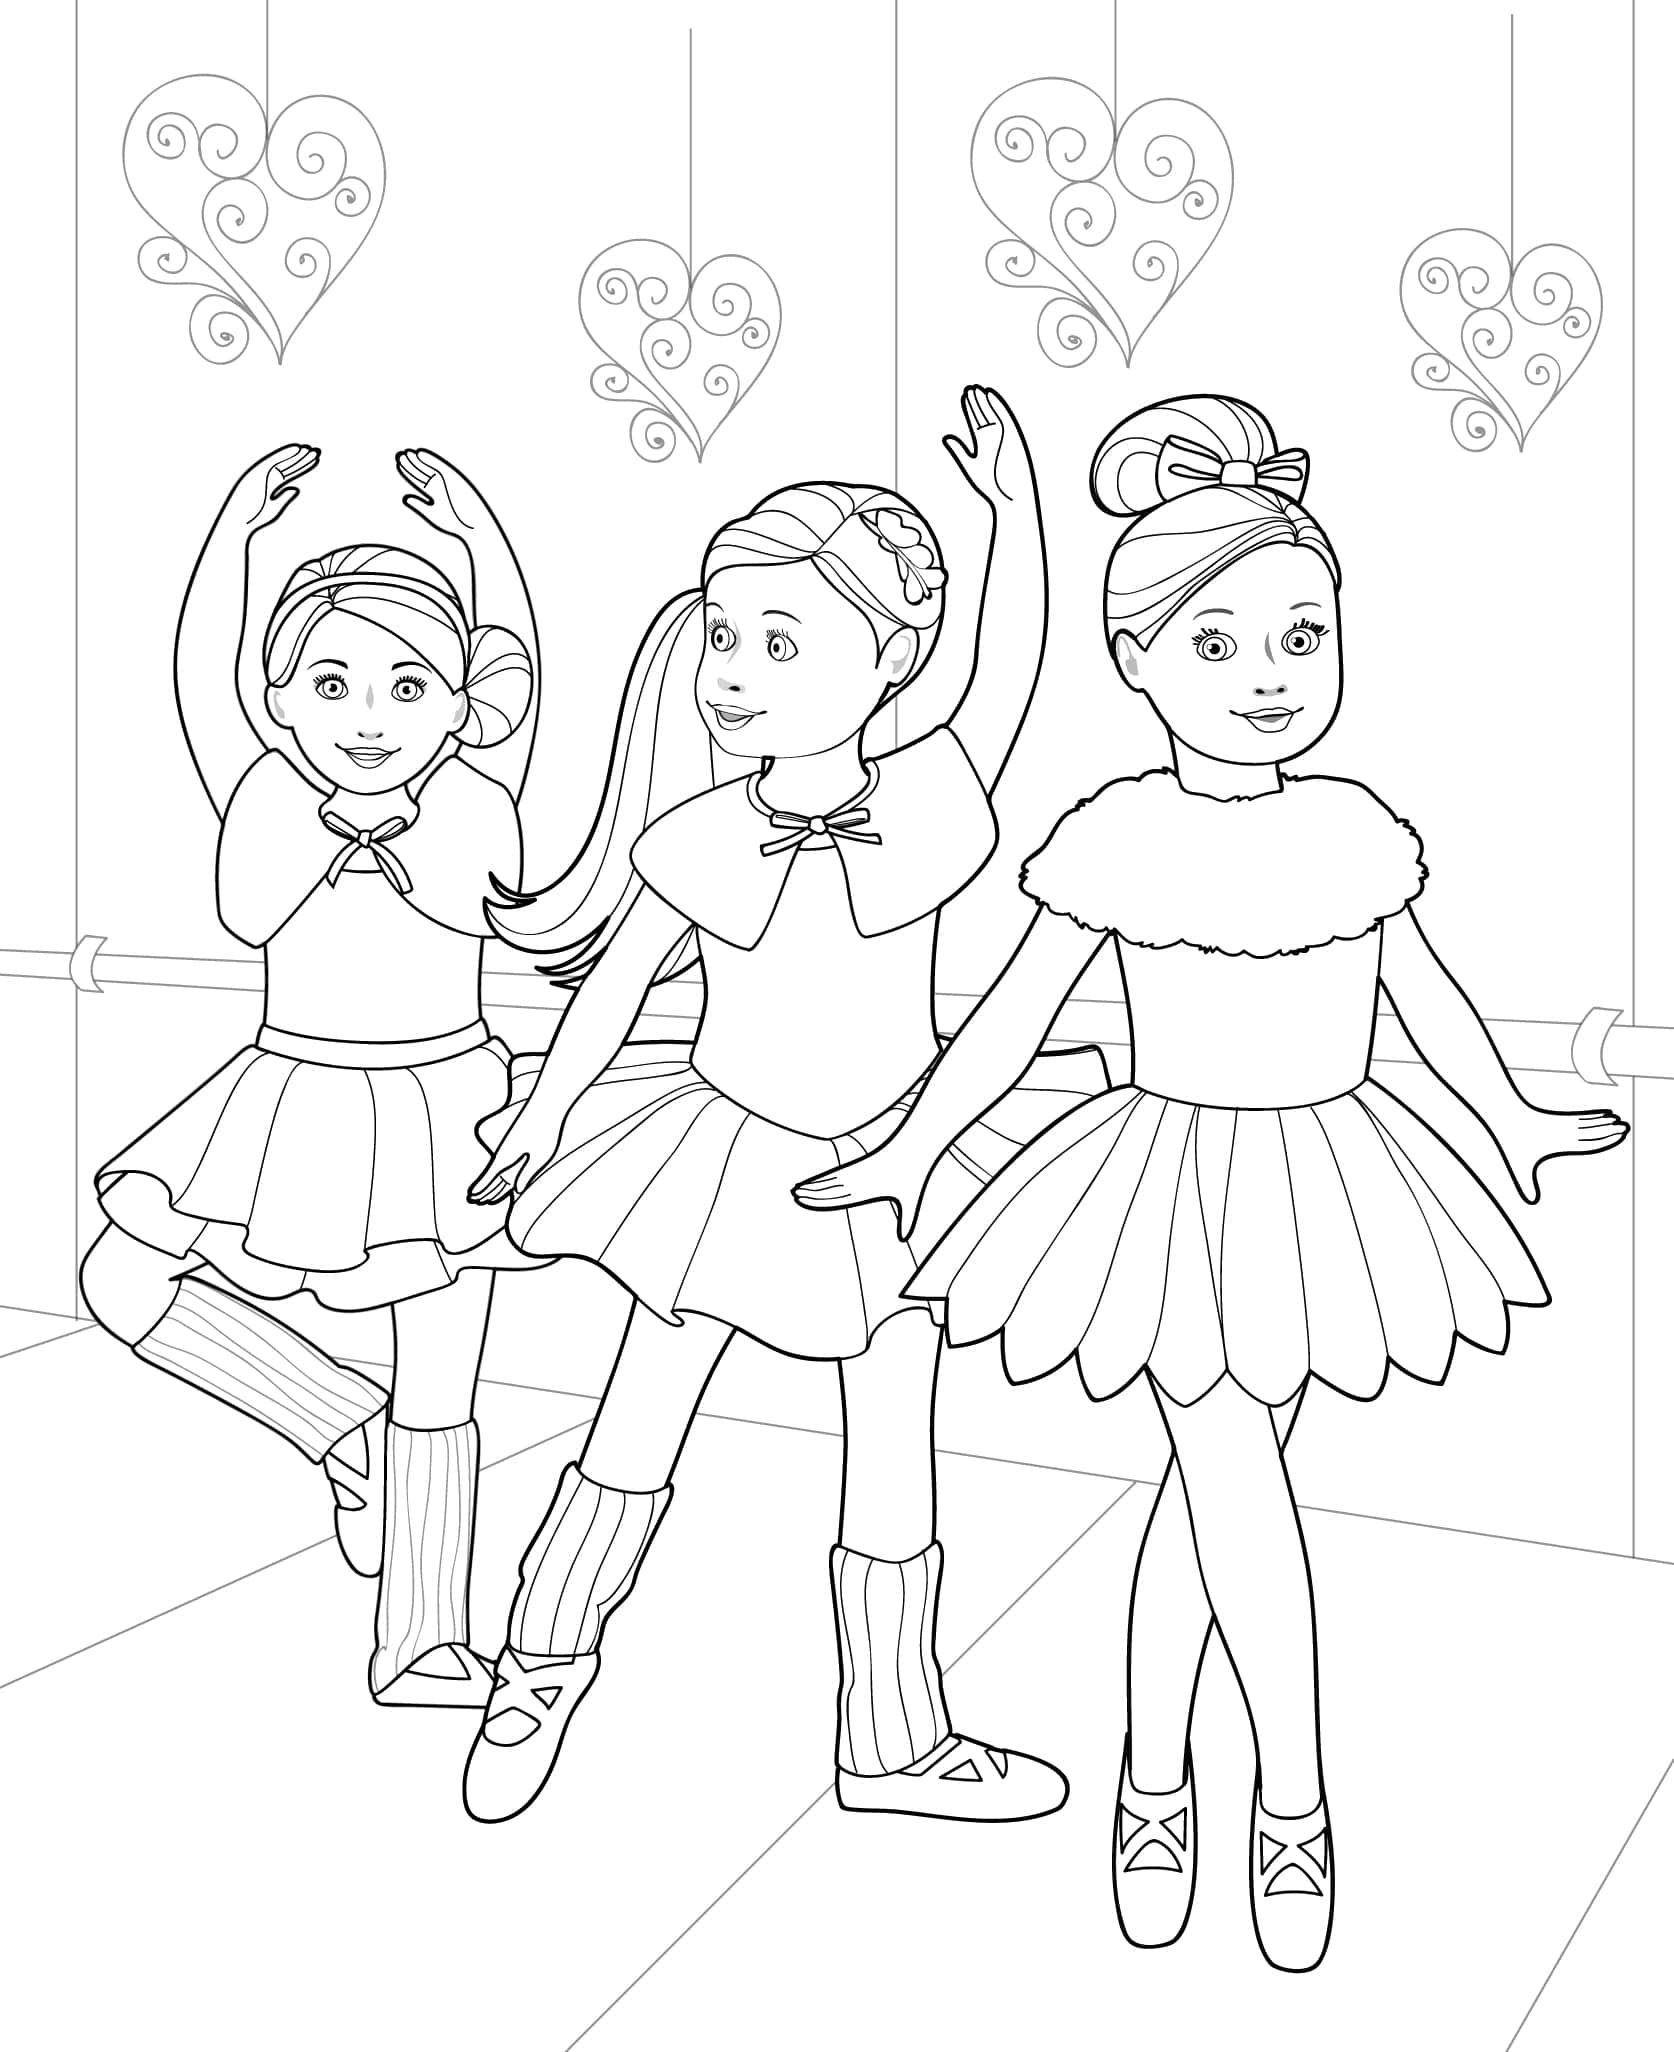 Doll coloring pages for girls our generation